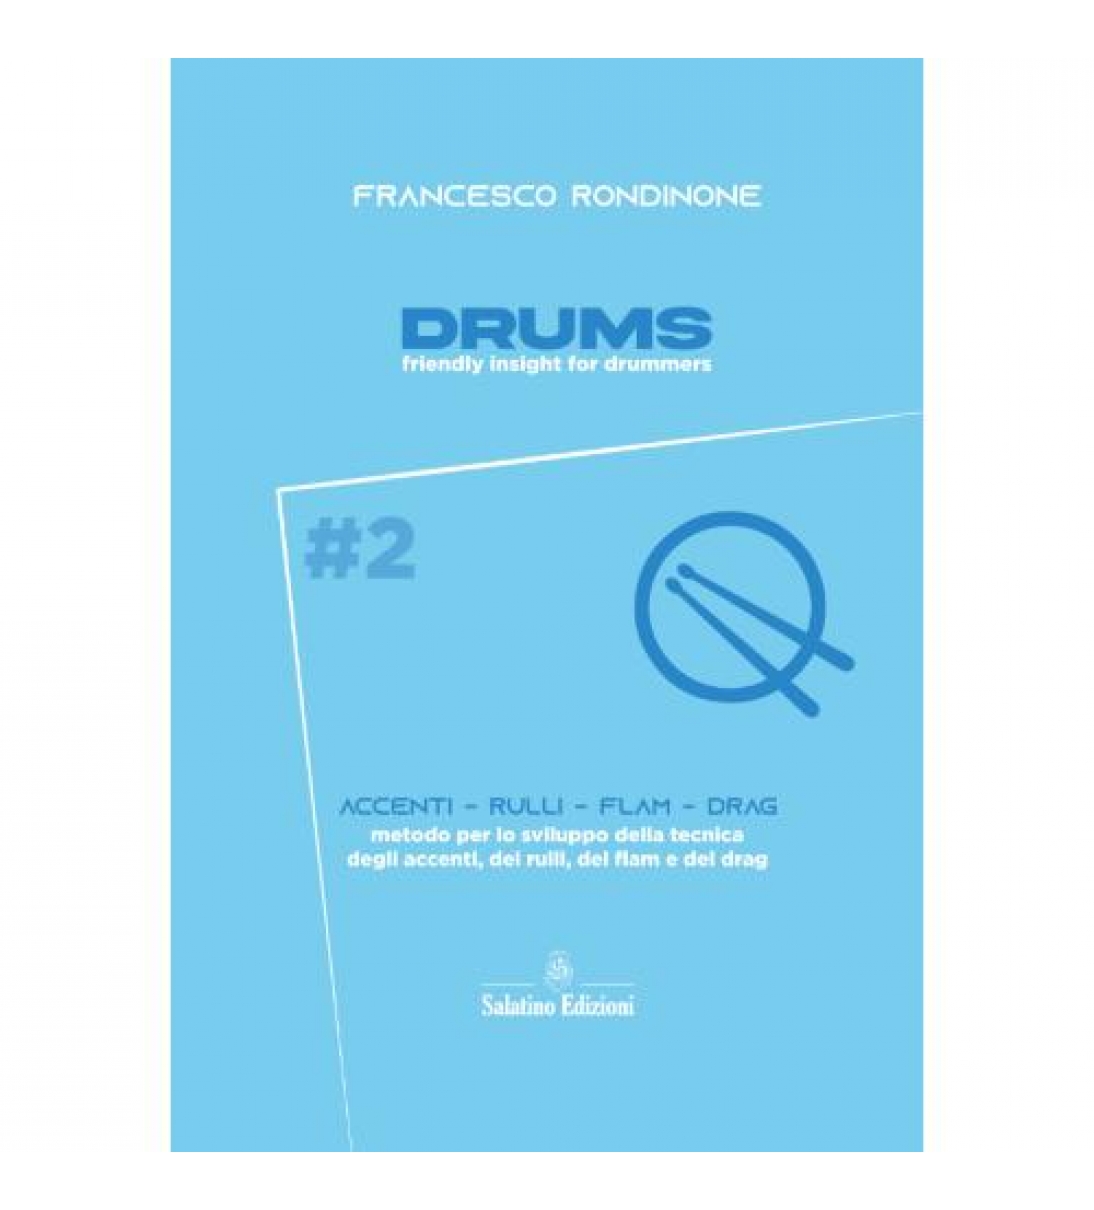 DRUMS: "friendly insights for drummers" volume 2 